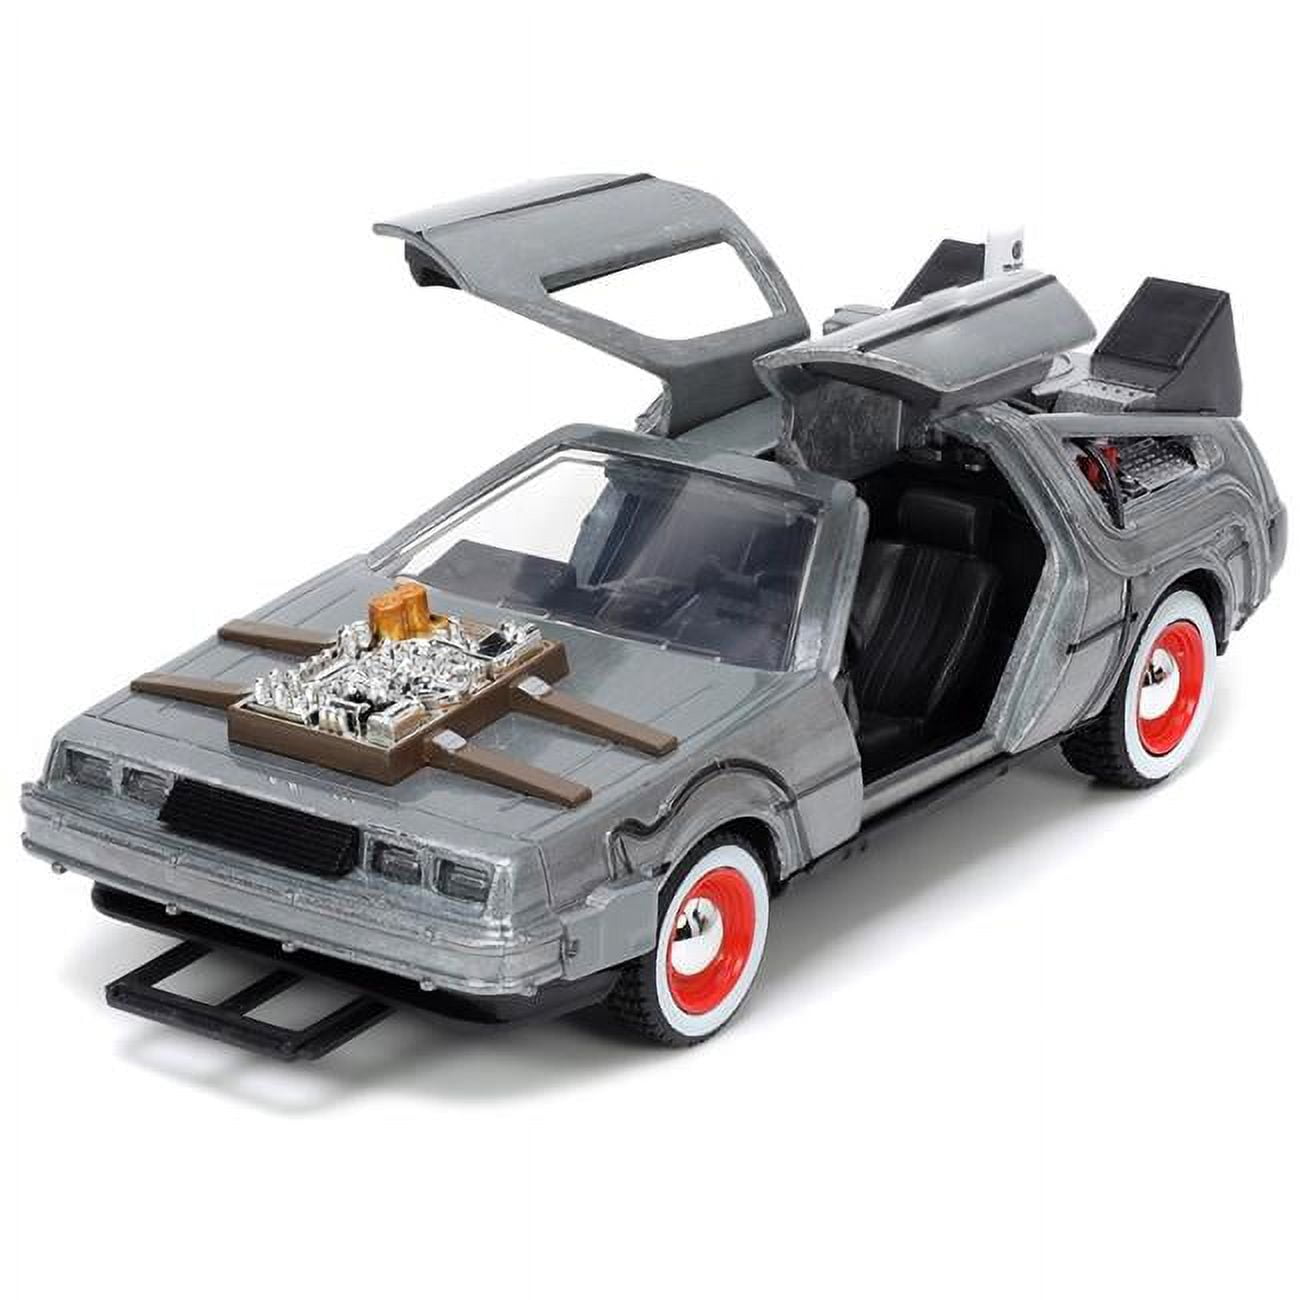 Jada Toys Jada 32290 Brushed Metal Back to the Future Part III Movie Hollywood Rides Series 1 by 32 Scale Diecast Model Car for DeLorean D